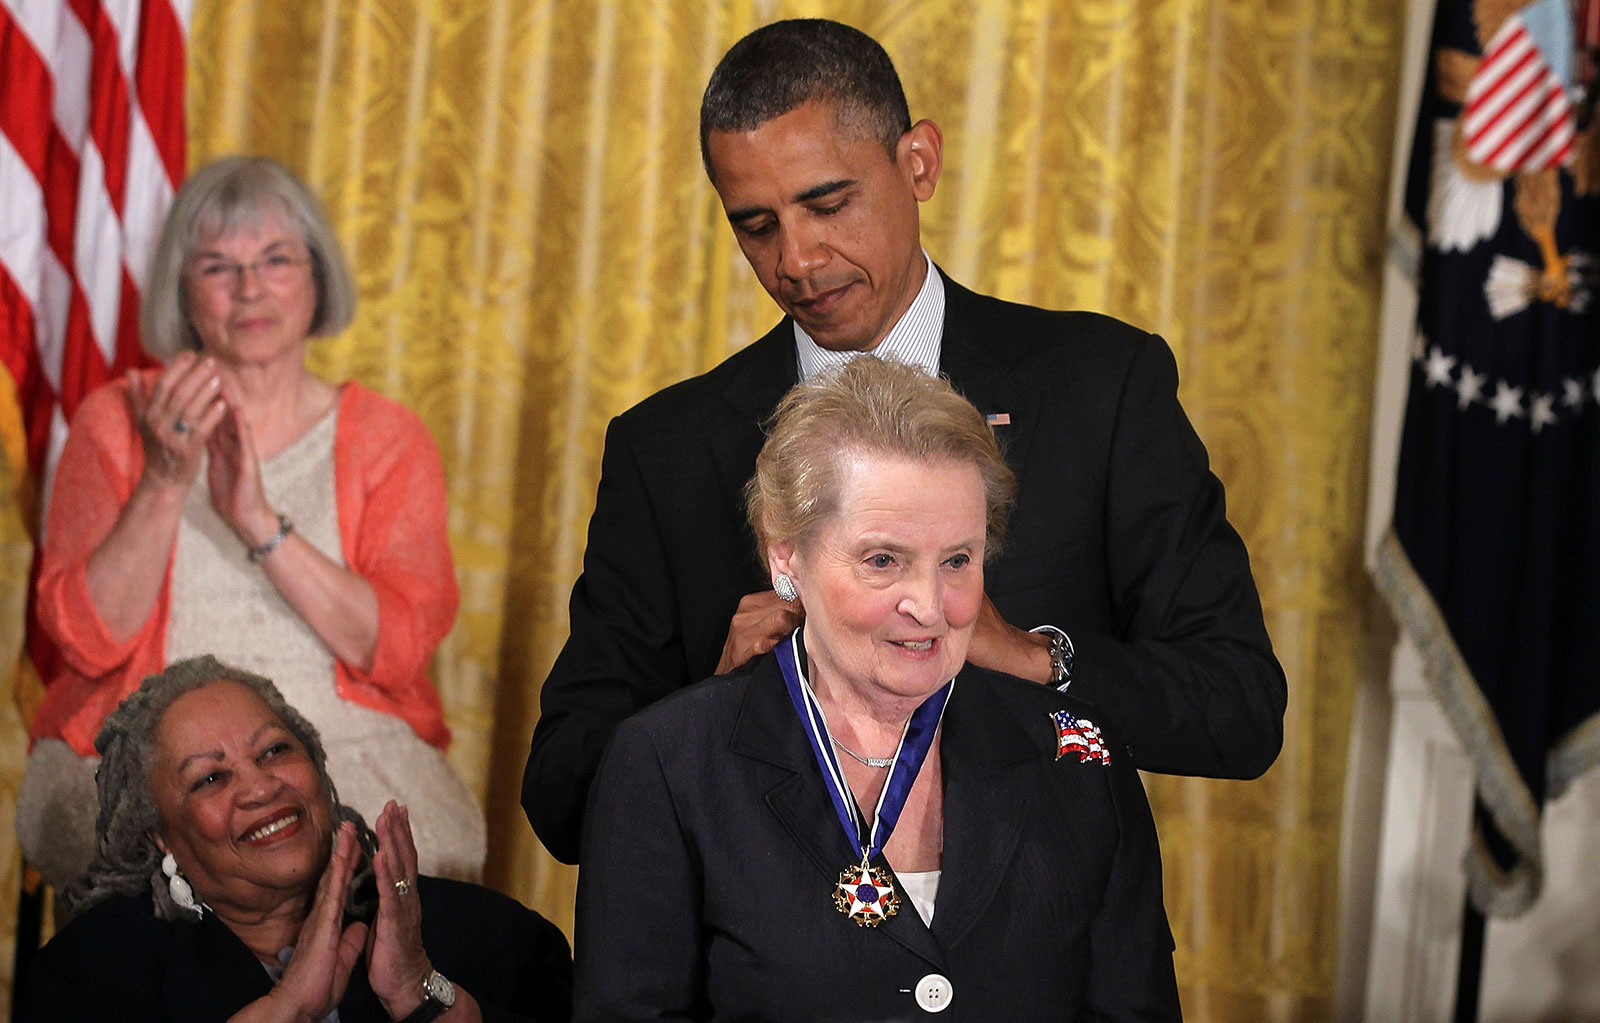 Former US Secretary of State Madeleine Albright is presented with a Presidential Medal of Freedom by President Barack Obama in 2012.